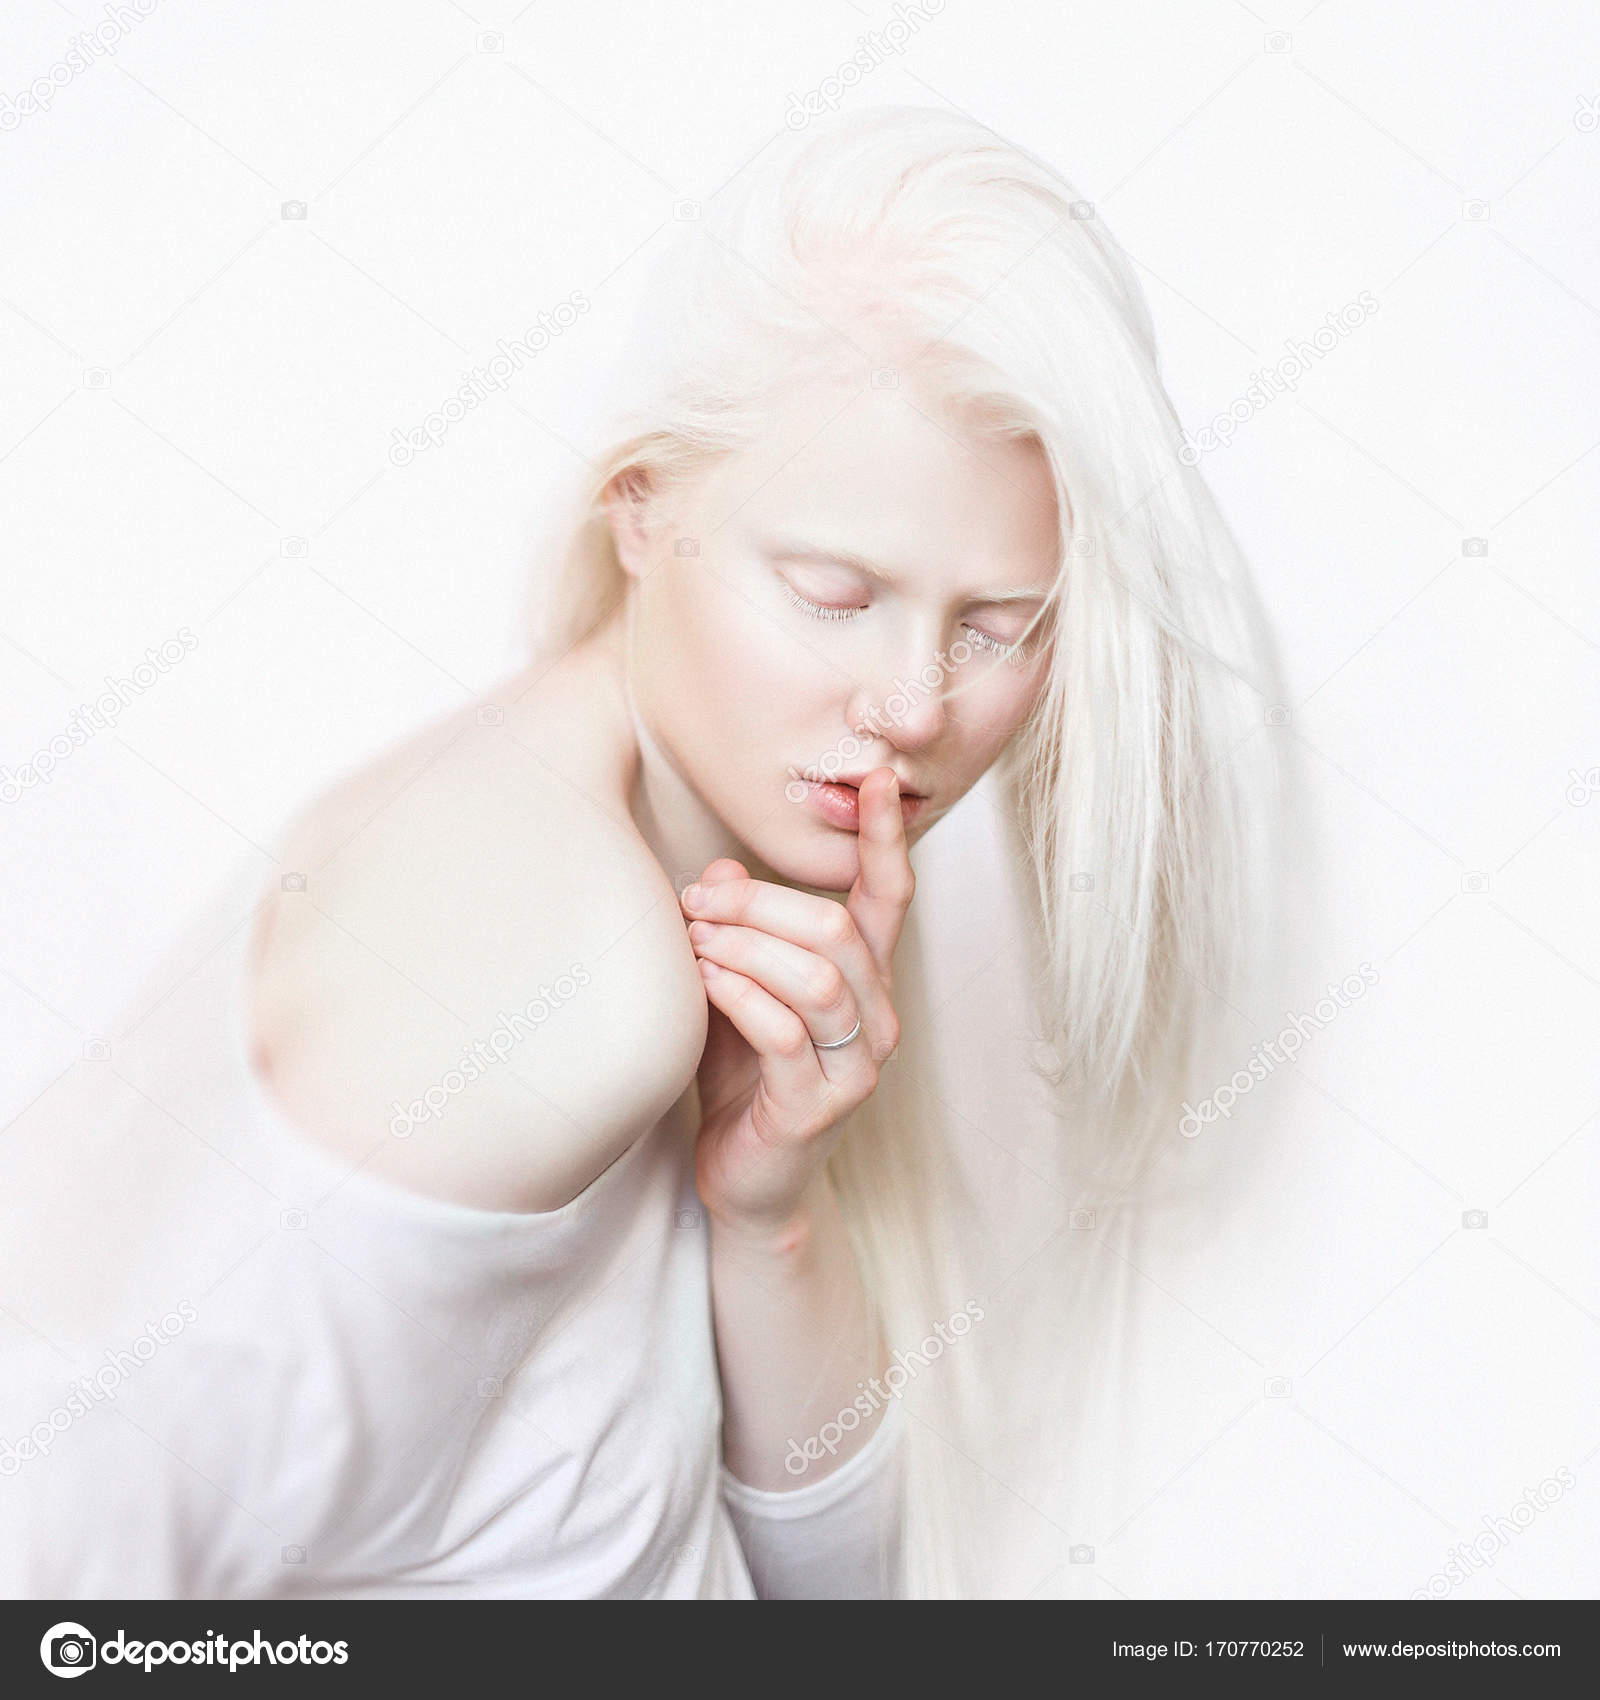 ᐈ Albino Stock Pictures Royalty Free Albinos Images Download On Depositphotos